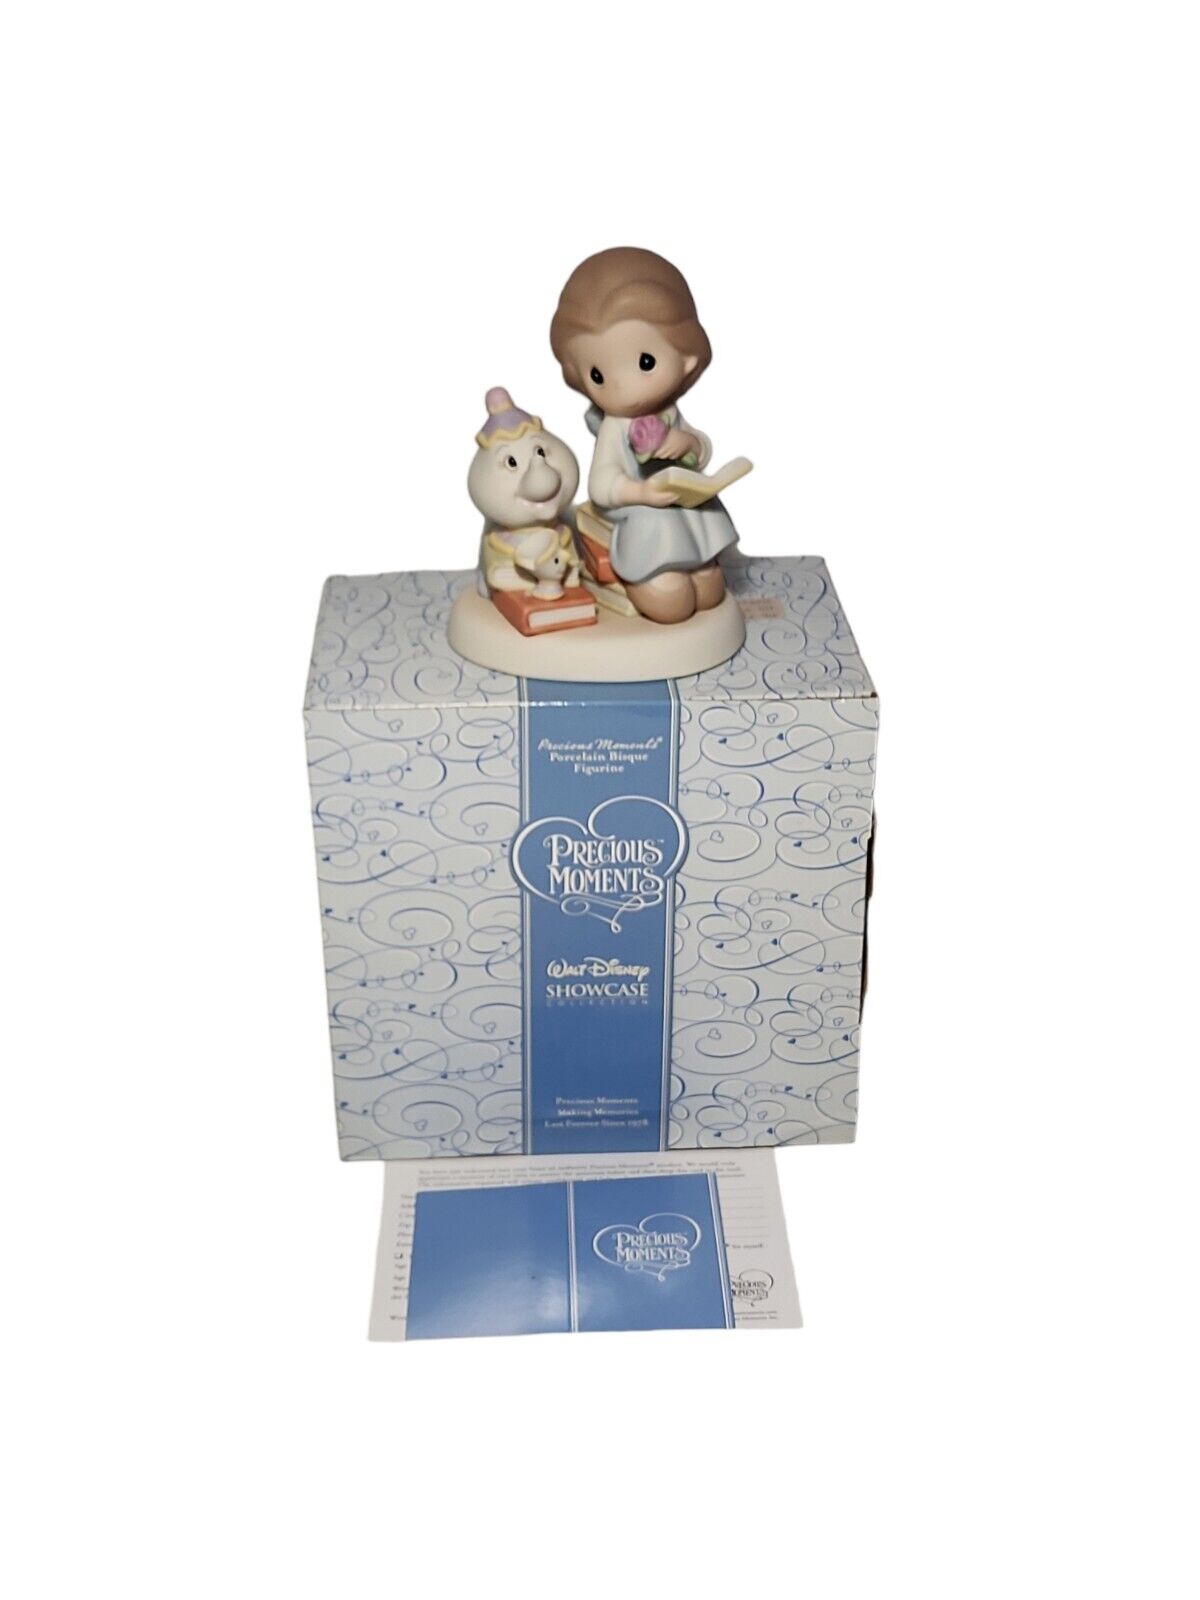 Precious Moments Disney Belle Figurine Beauty and Beast Follow Your Heart in Box